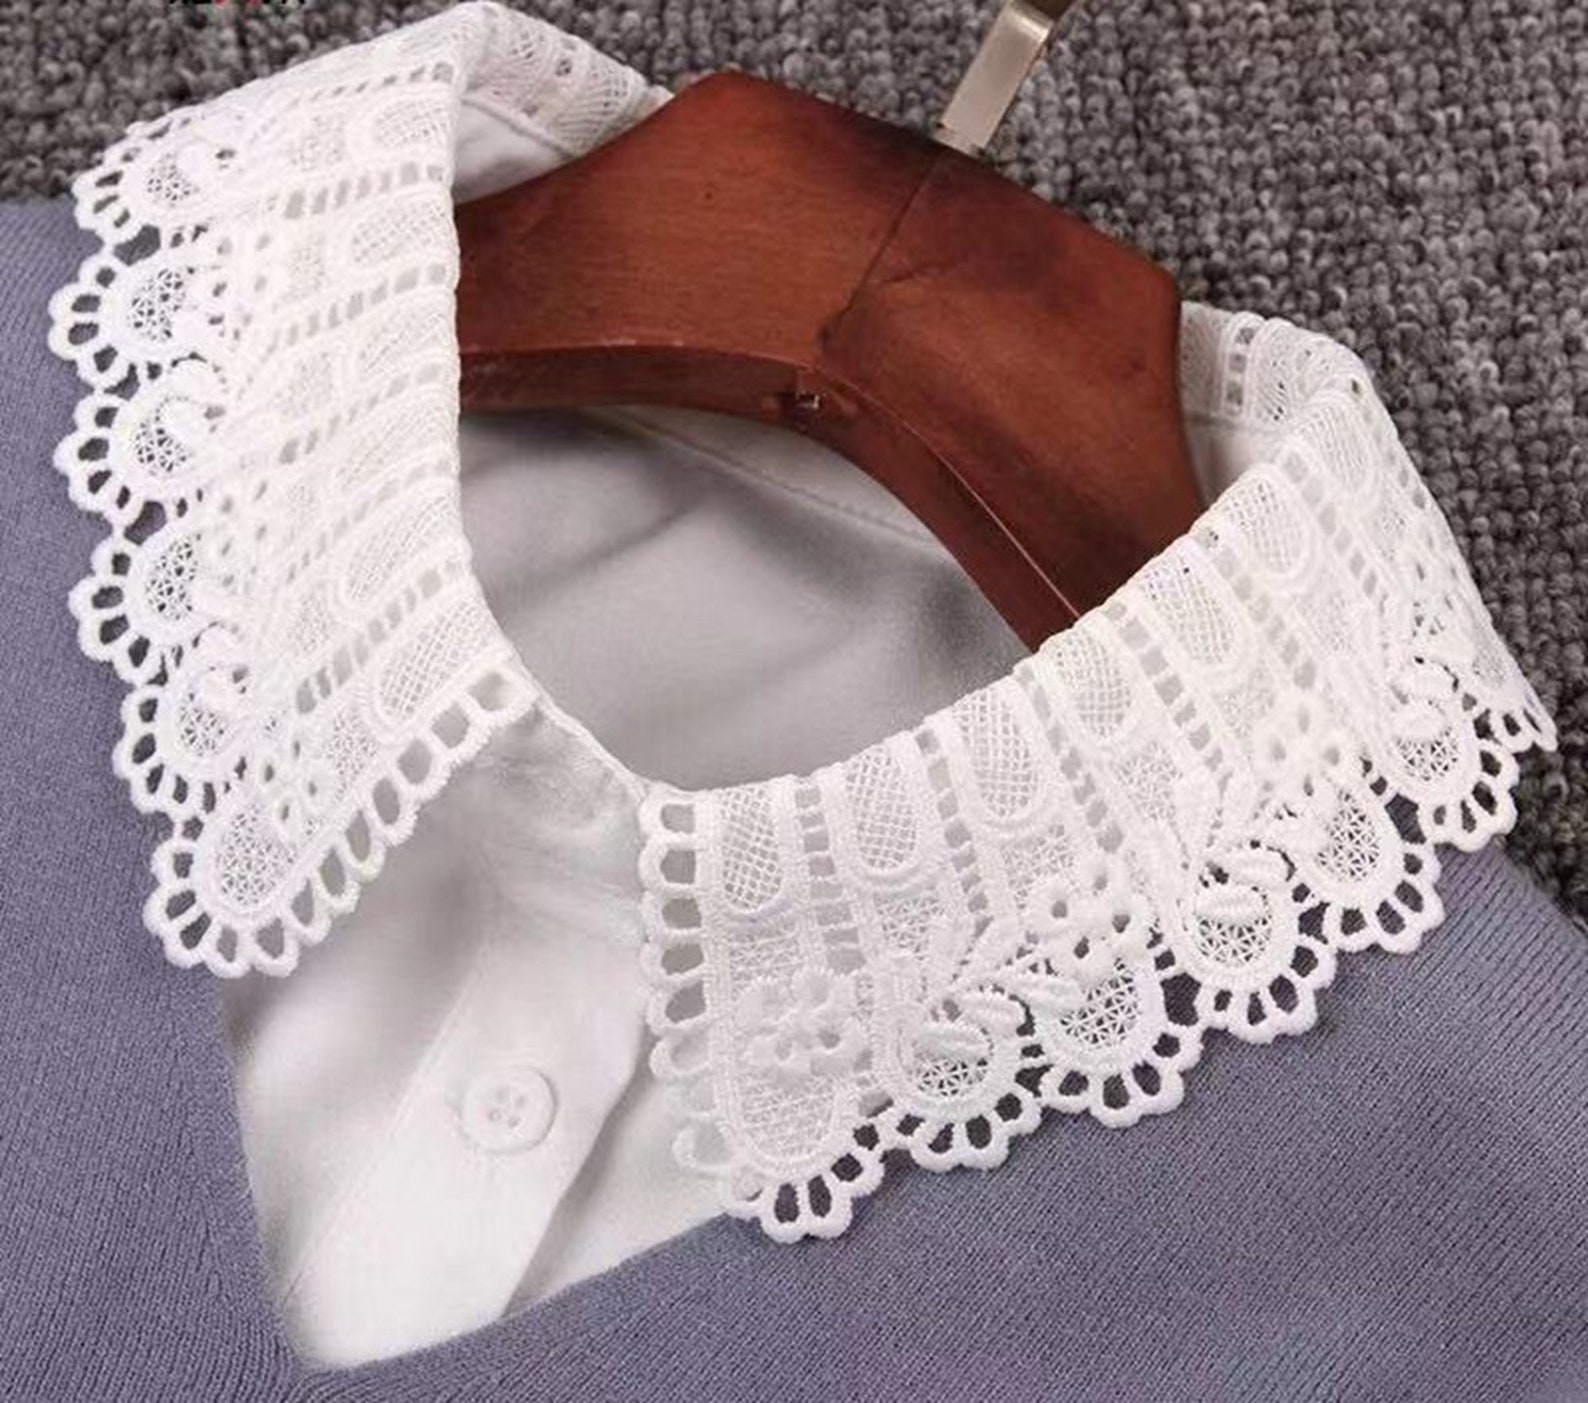 Simple Daily Lace Collars sew on Lace fake collarLace | Etsy